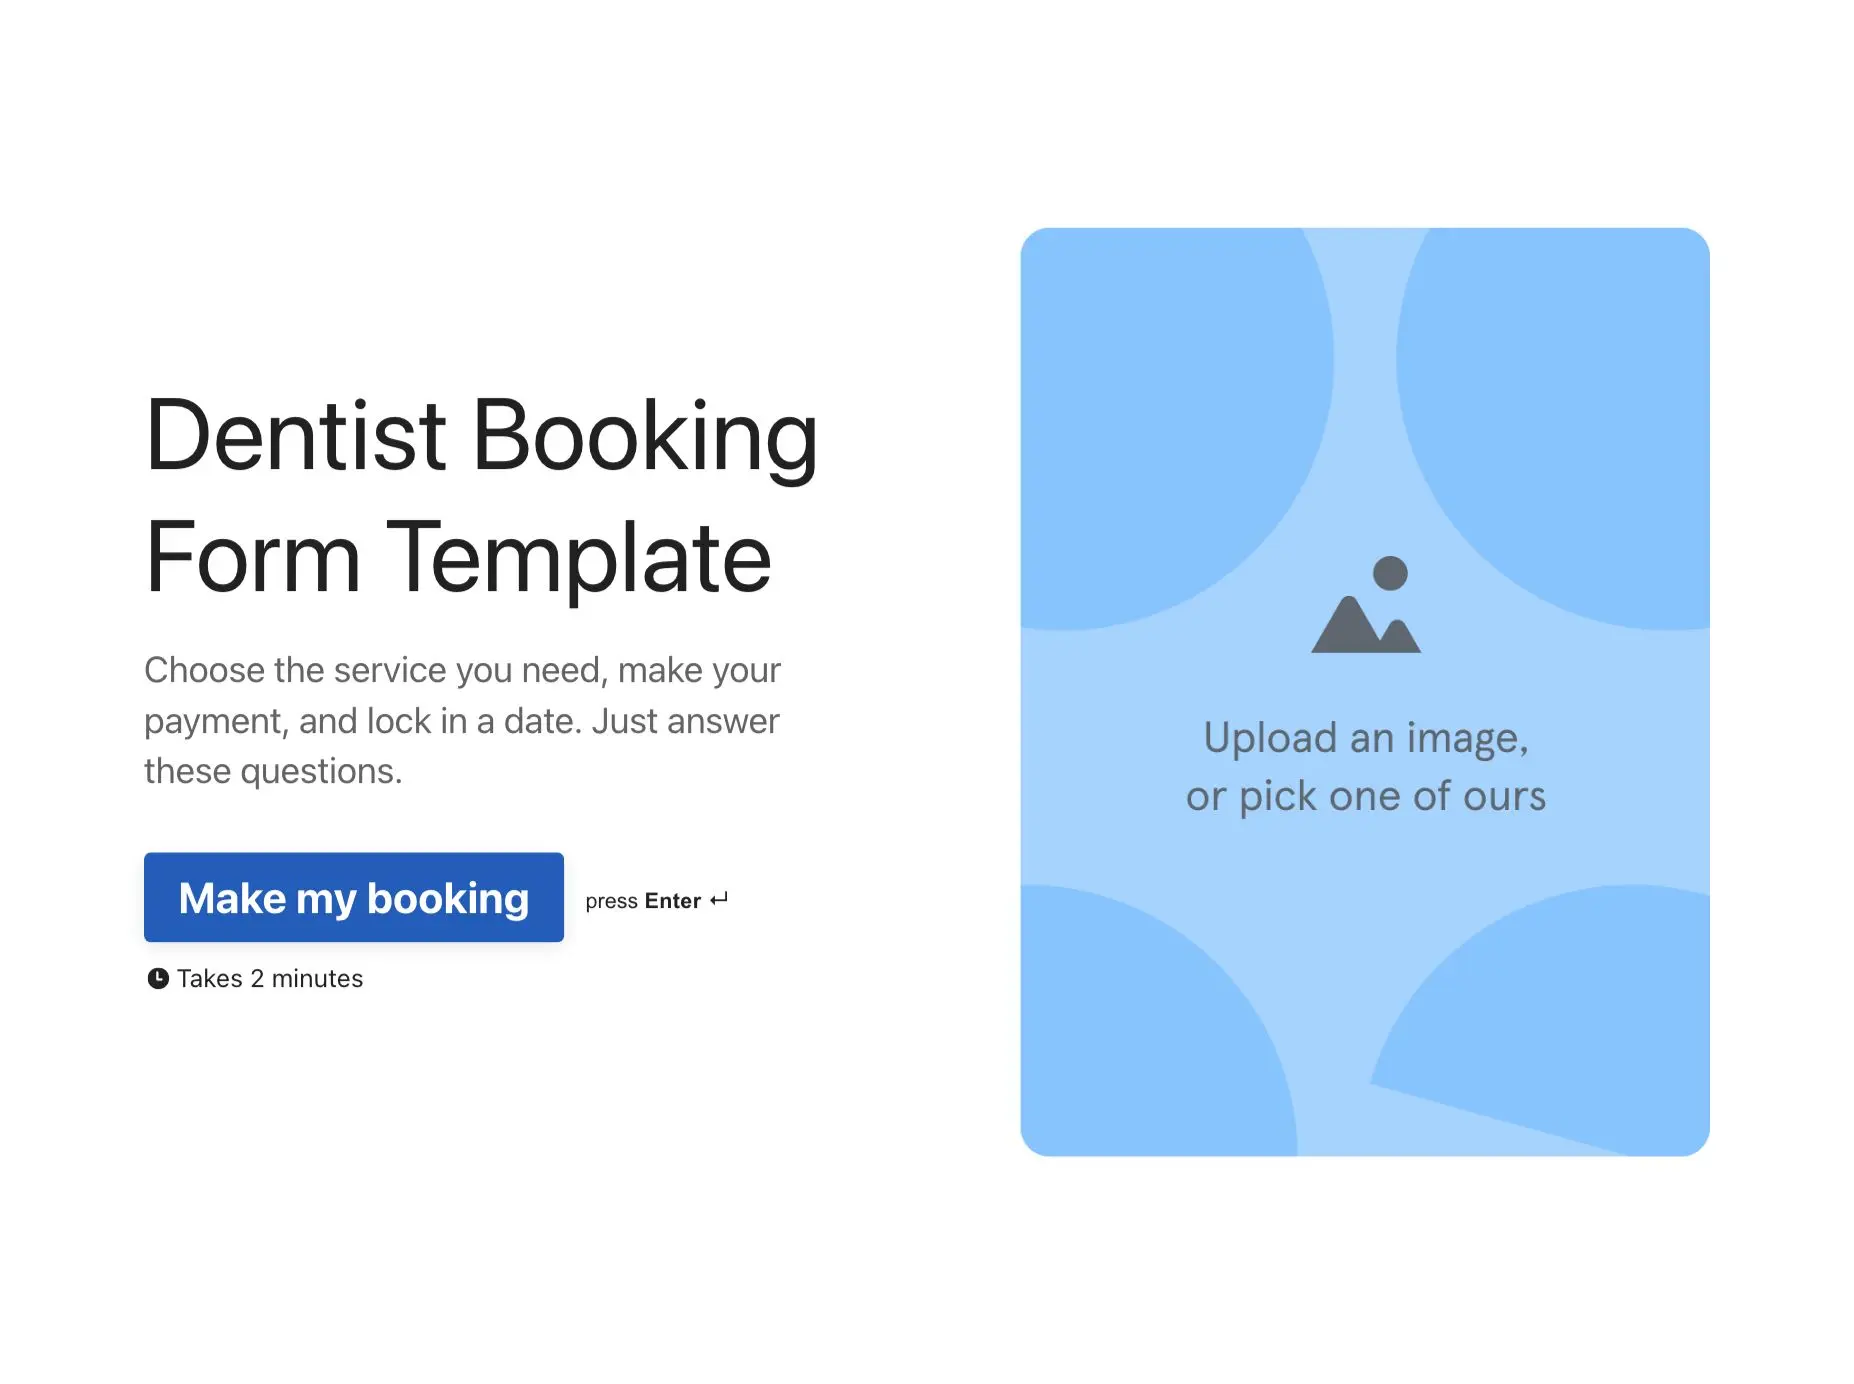 Dentist Booking Form Template Hero